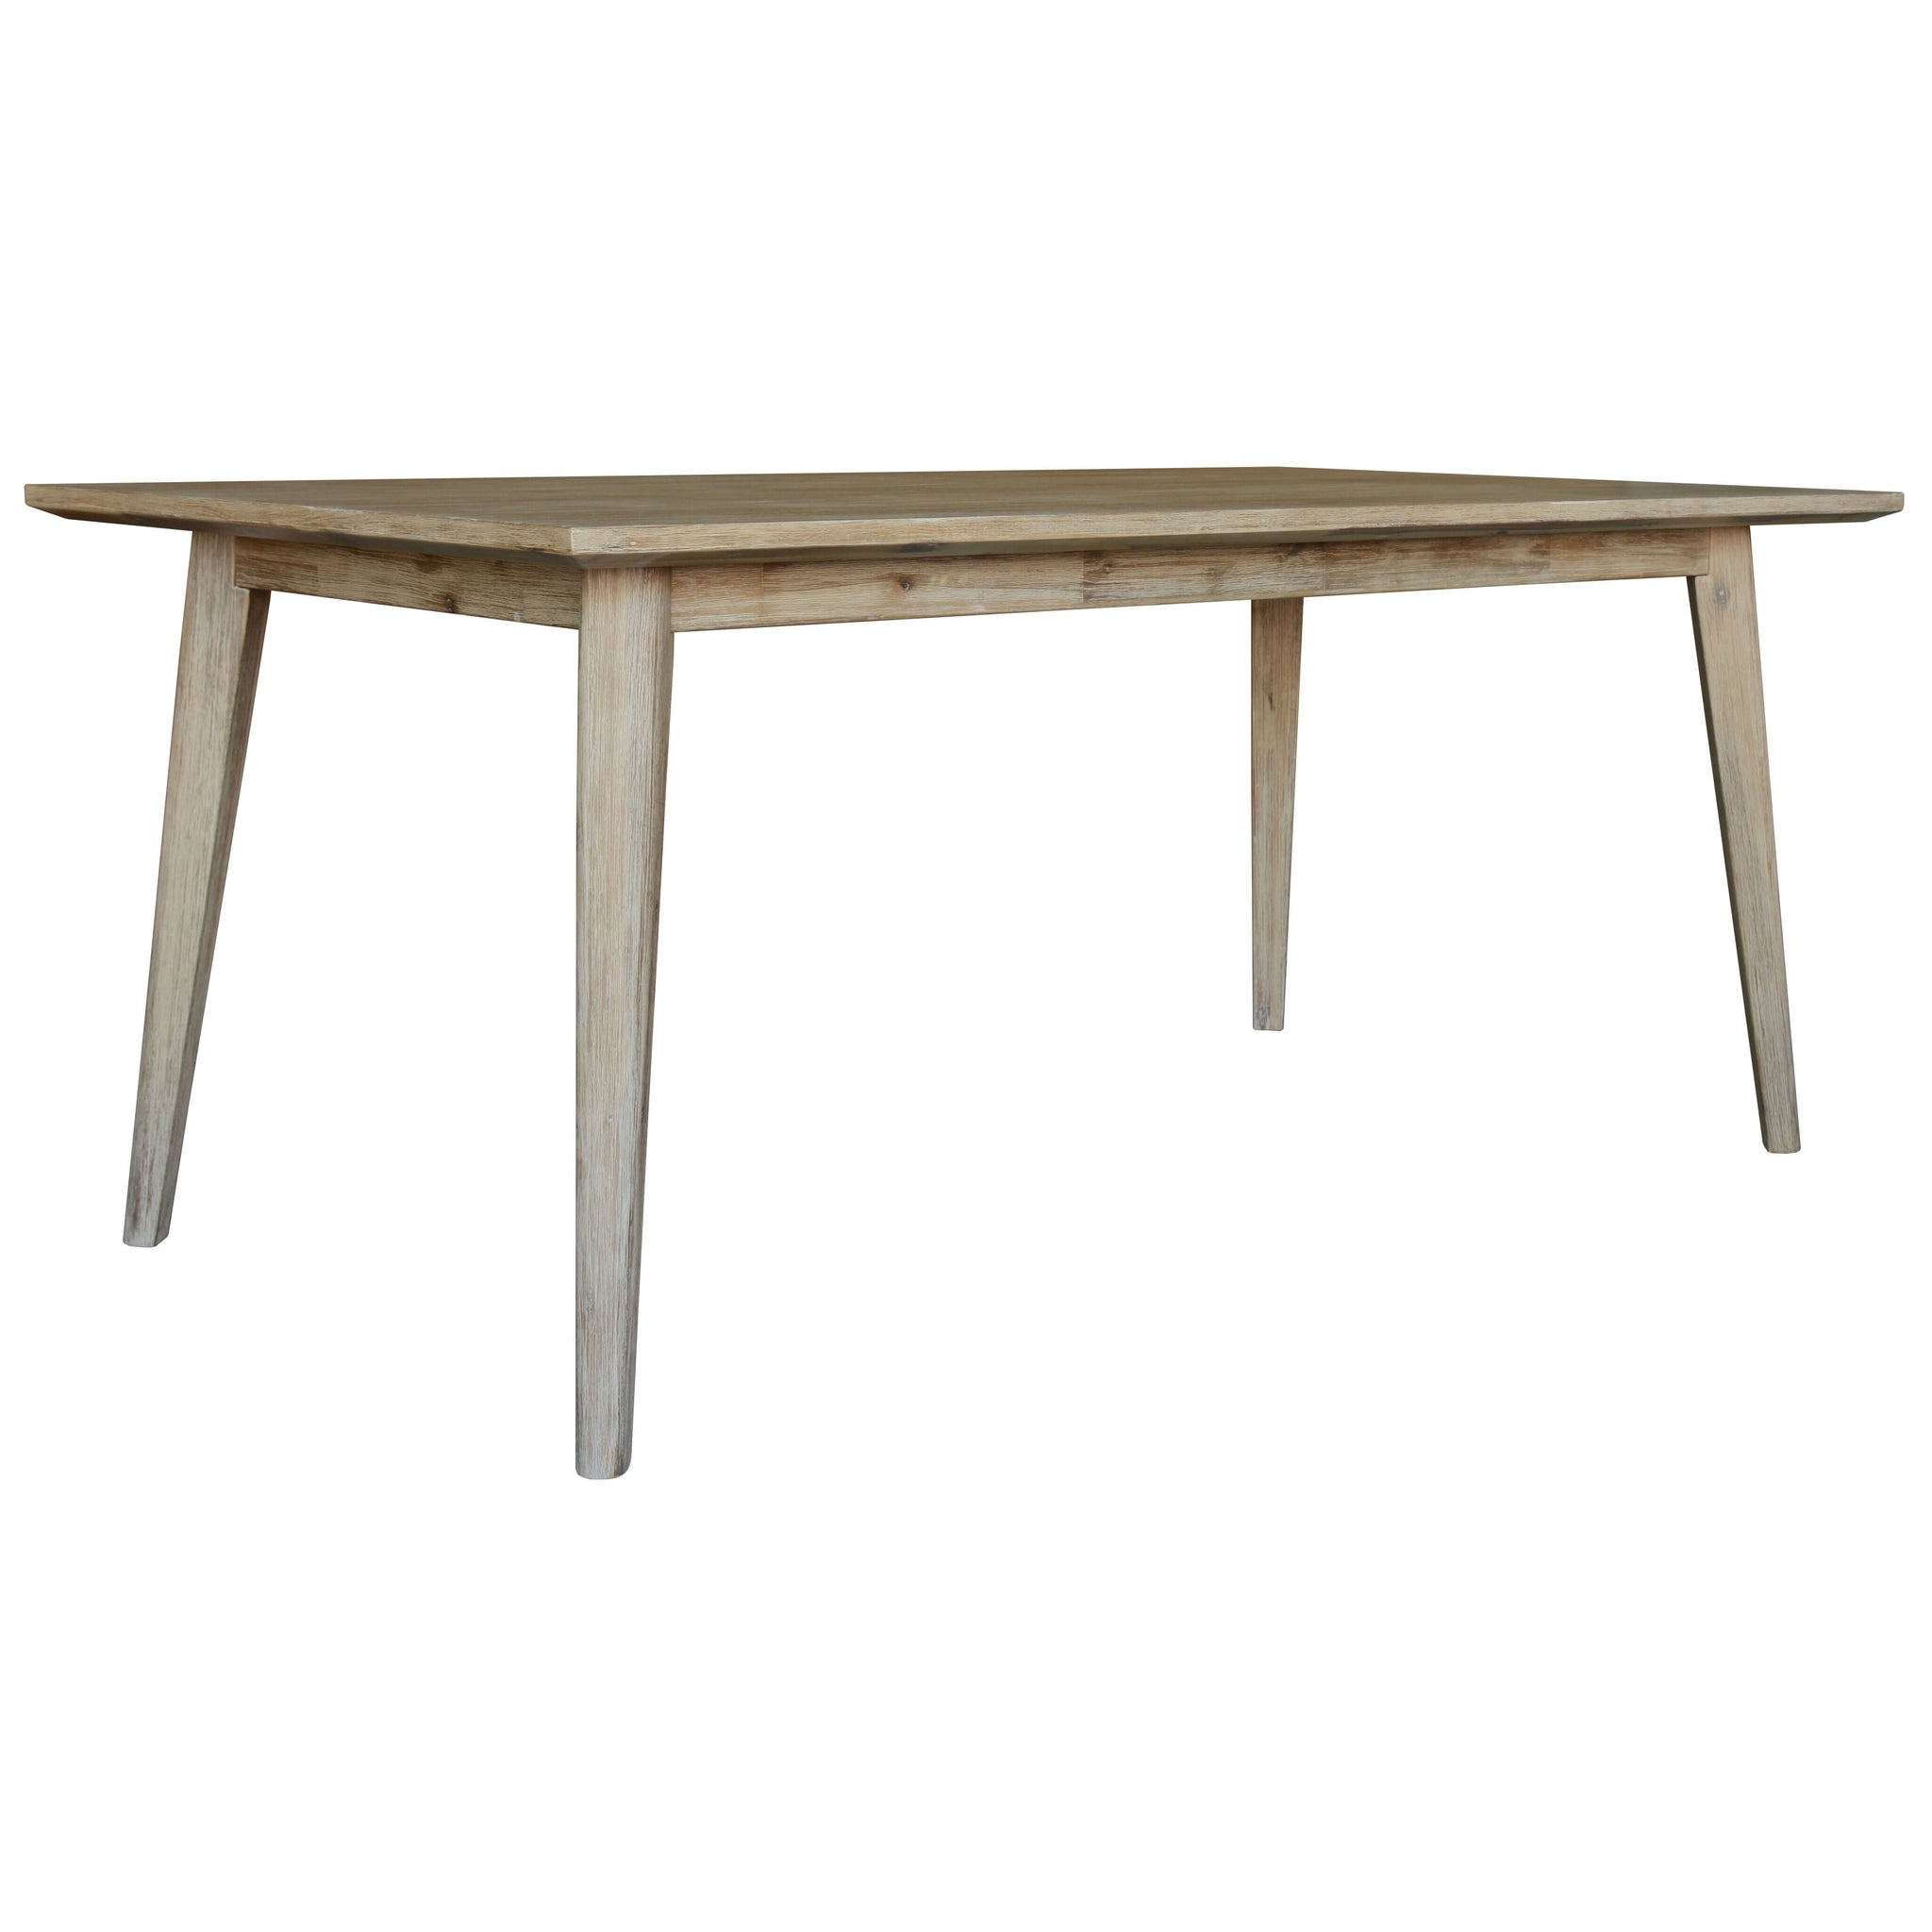 Grevillea Dining Table 210cm Solid Acacia Timber Wood Tropical Furniture - Brown-Upinteriors